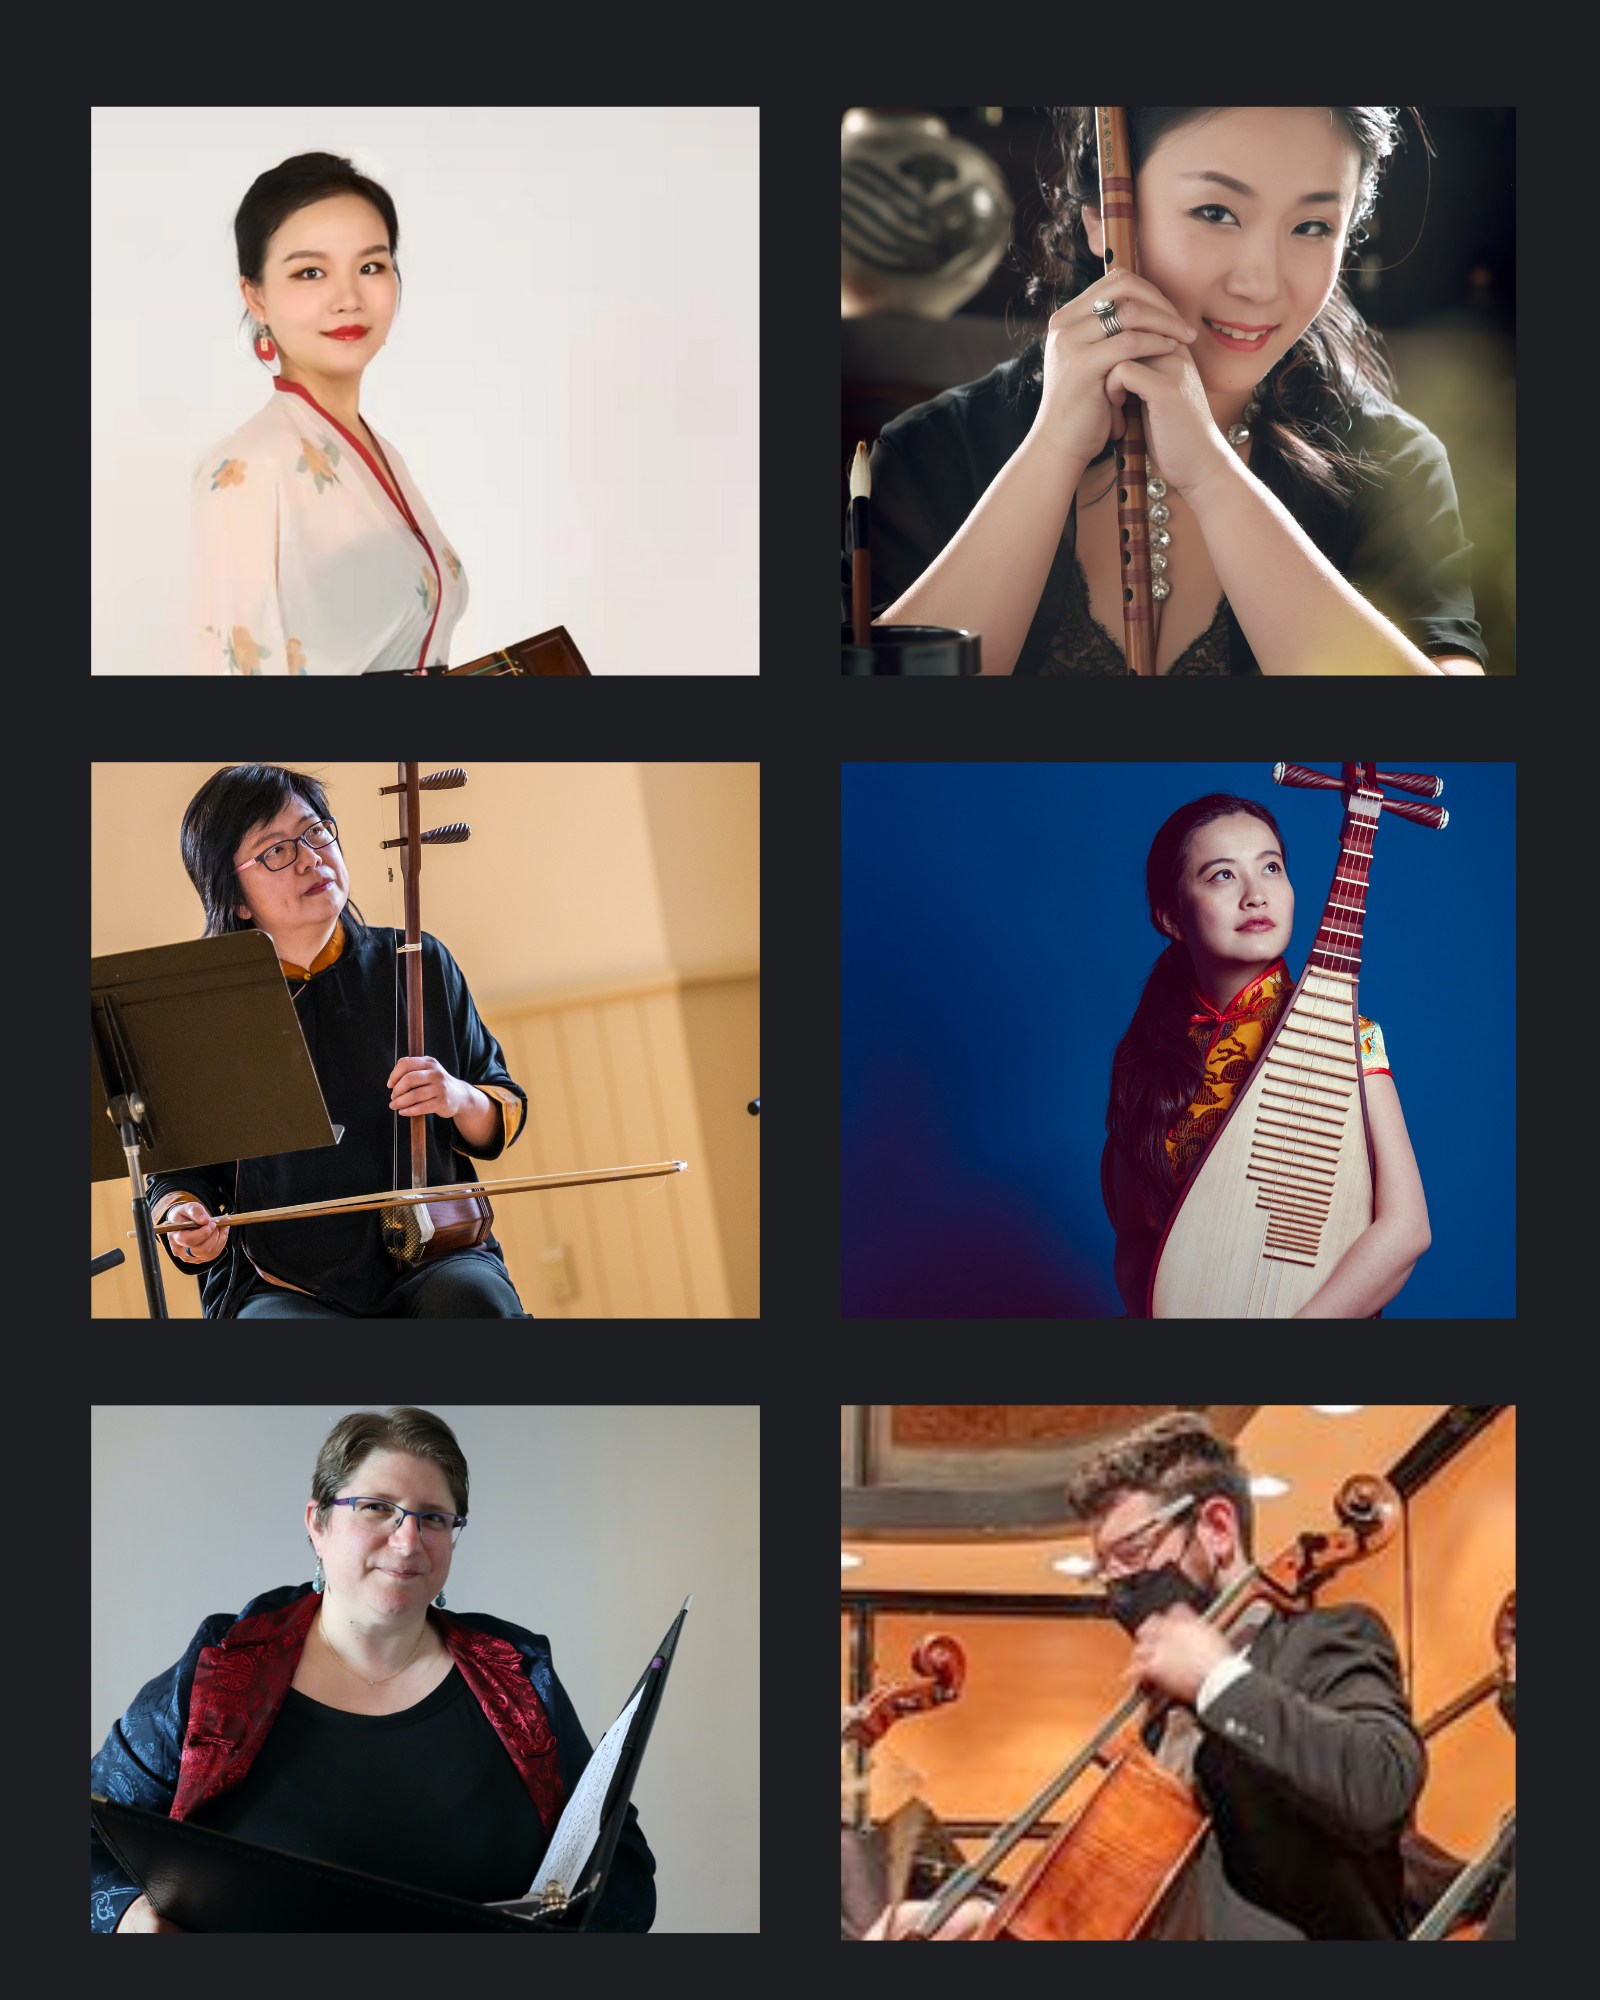 Pictures of the six players of the TCO chamber orchestra and singer, with their instruments or scores.